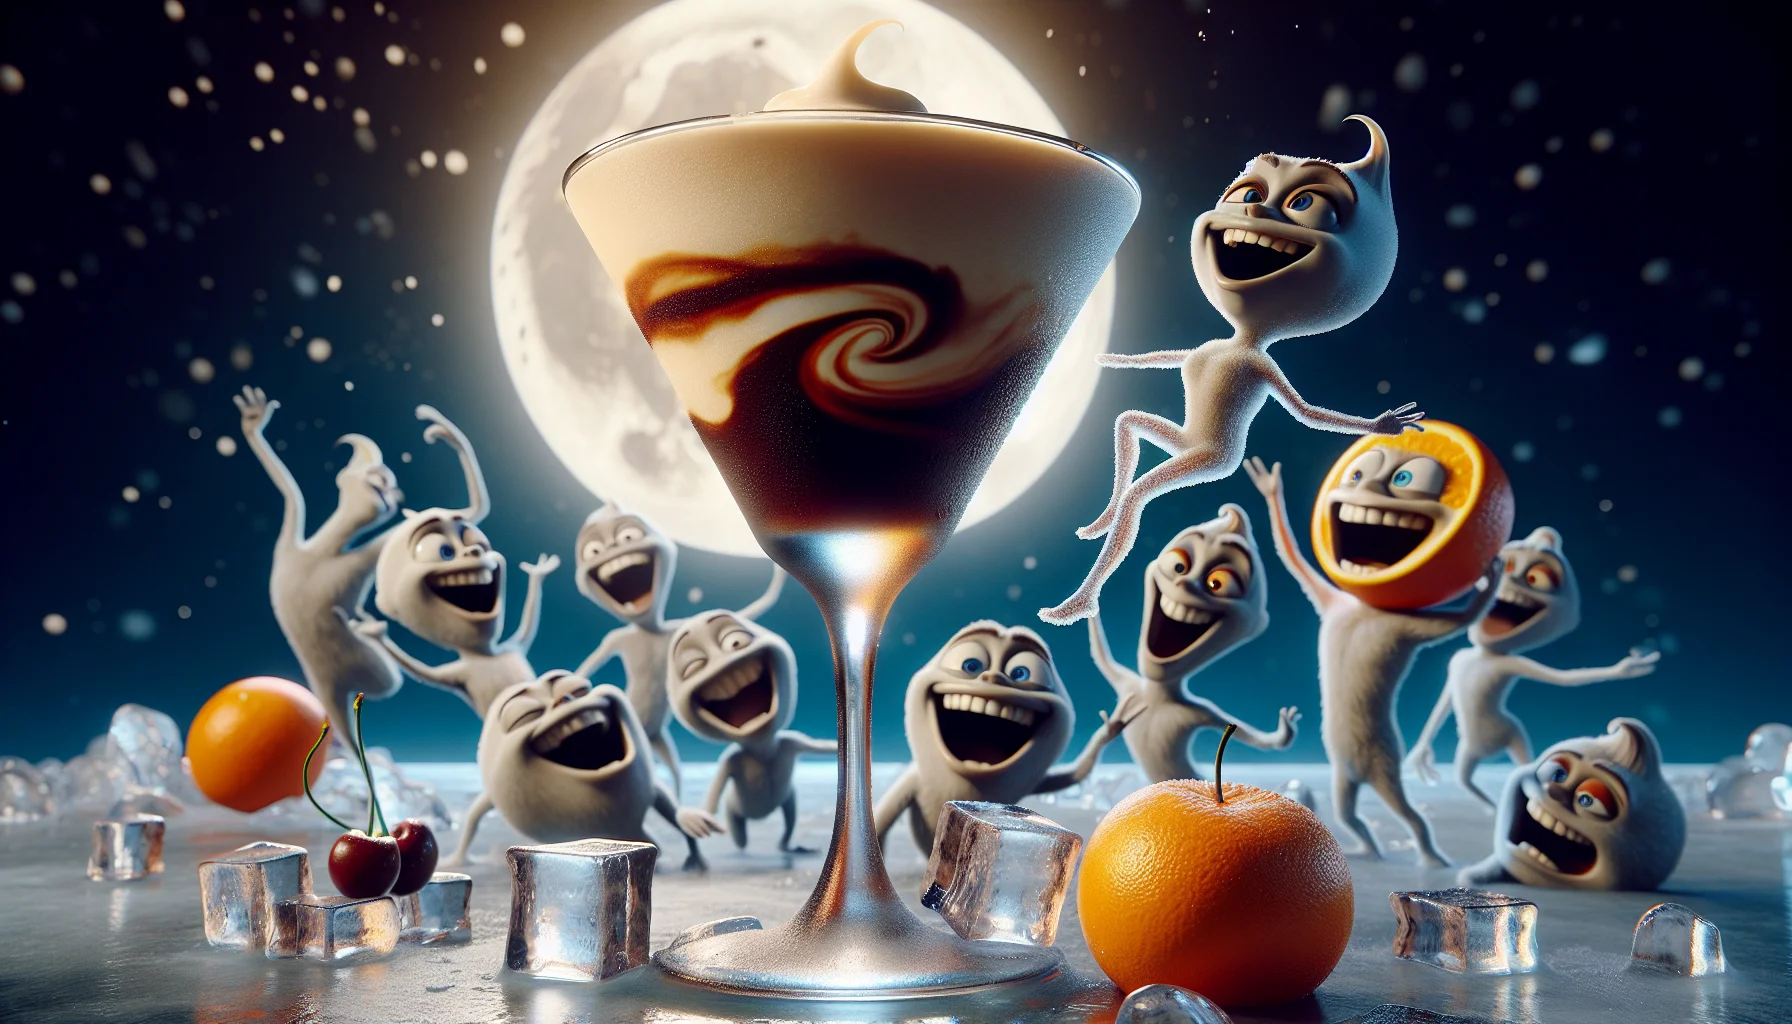 Generate an image of a frozen espresso martini set in an unexpected and amusing scenario. The frothy, icy drink sits with rich chocolate swirls contrasting against the clear, elegant glass. The glass seemingly 'dances' on an icy table, underneath the bright, chilling moonlight. In the backdrop, a group of animated and laughing fruits, like oranges and cherries, appears to be encouraging people to join in their rambunctious fun, representing the drink's enjoyable flavors. The scene indicates an attractive aura of mirth and whimsicality, playfully enticing viewers to sample this delightful cocktail.